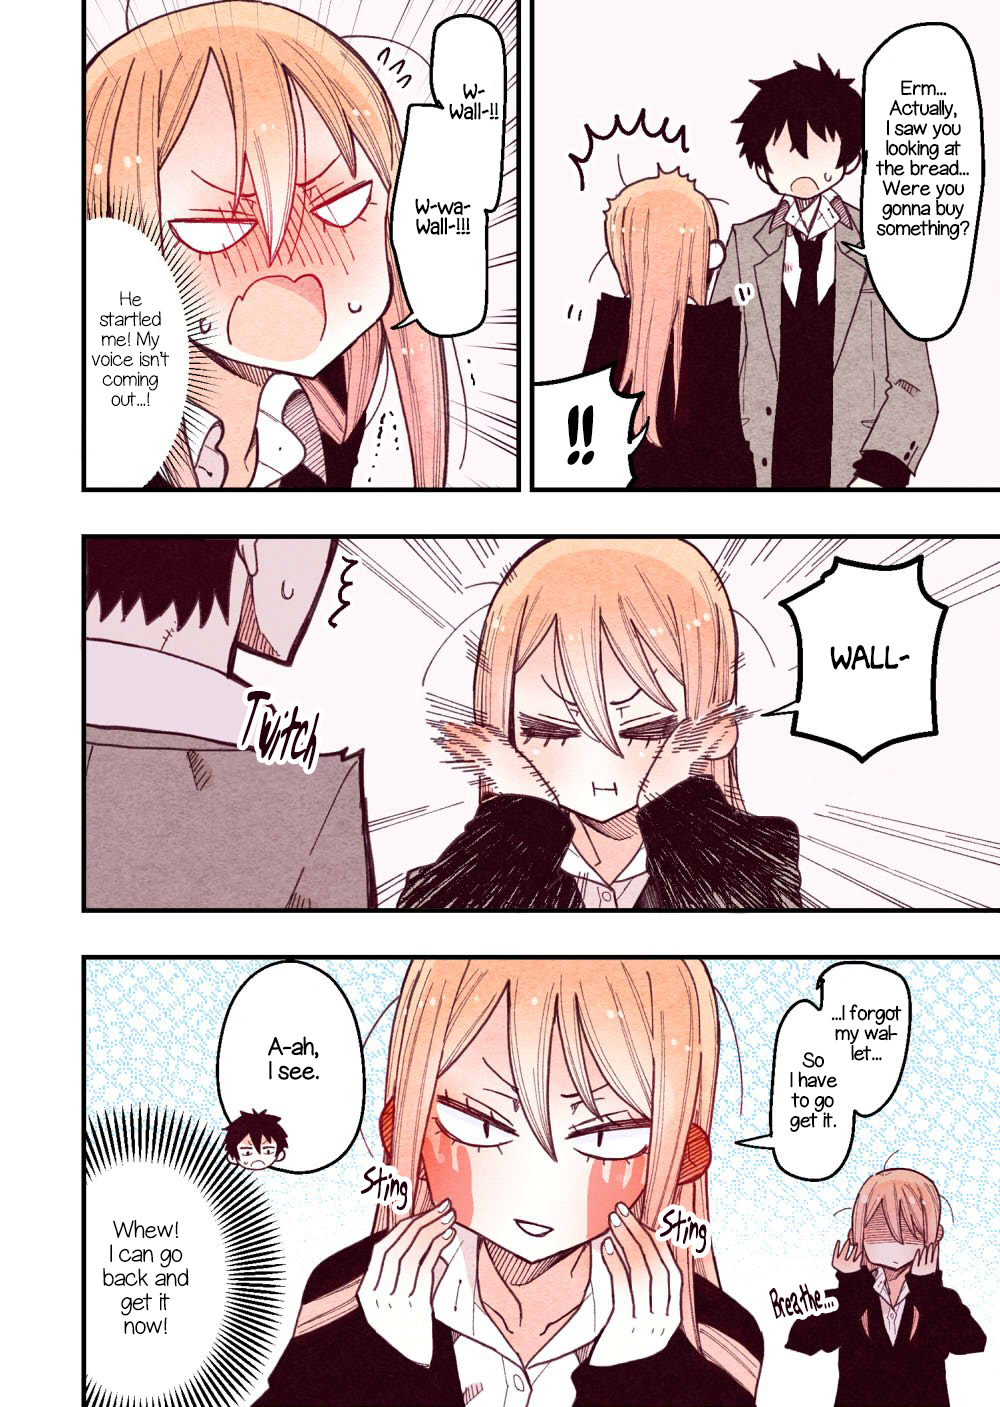 The Feelings of a Girl with Sanpaku Eyes Vol. 1 Ch. 4 The Lunchbox